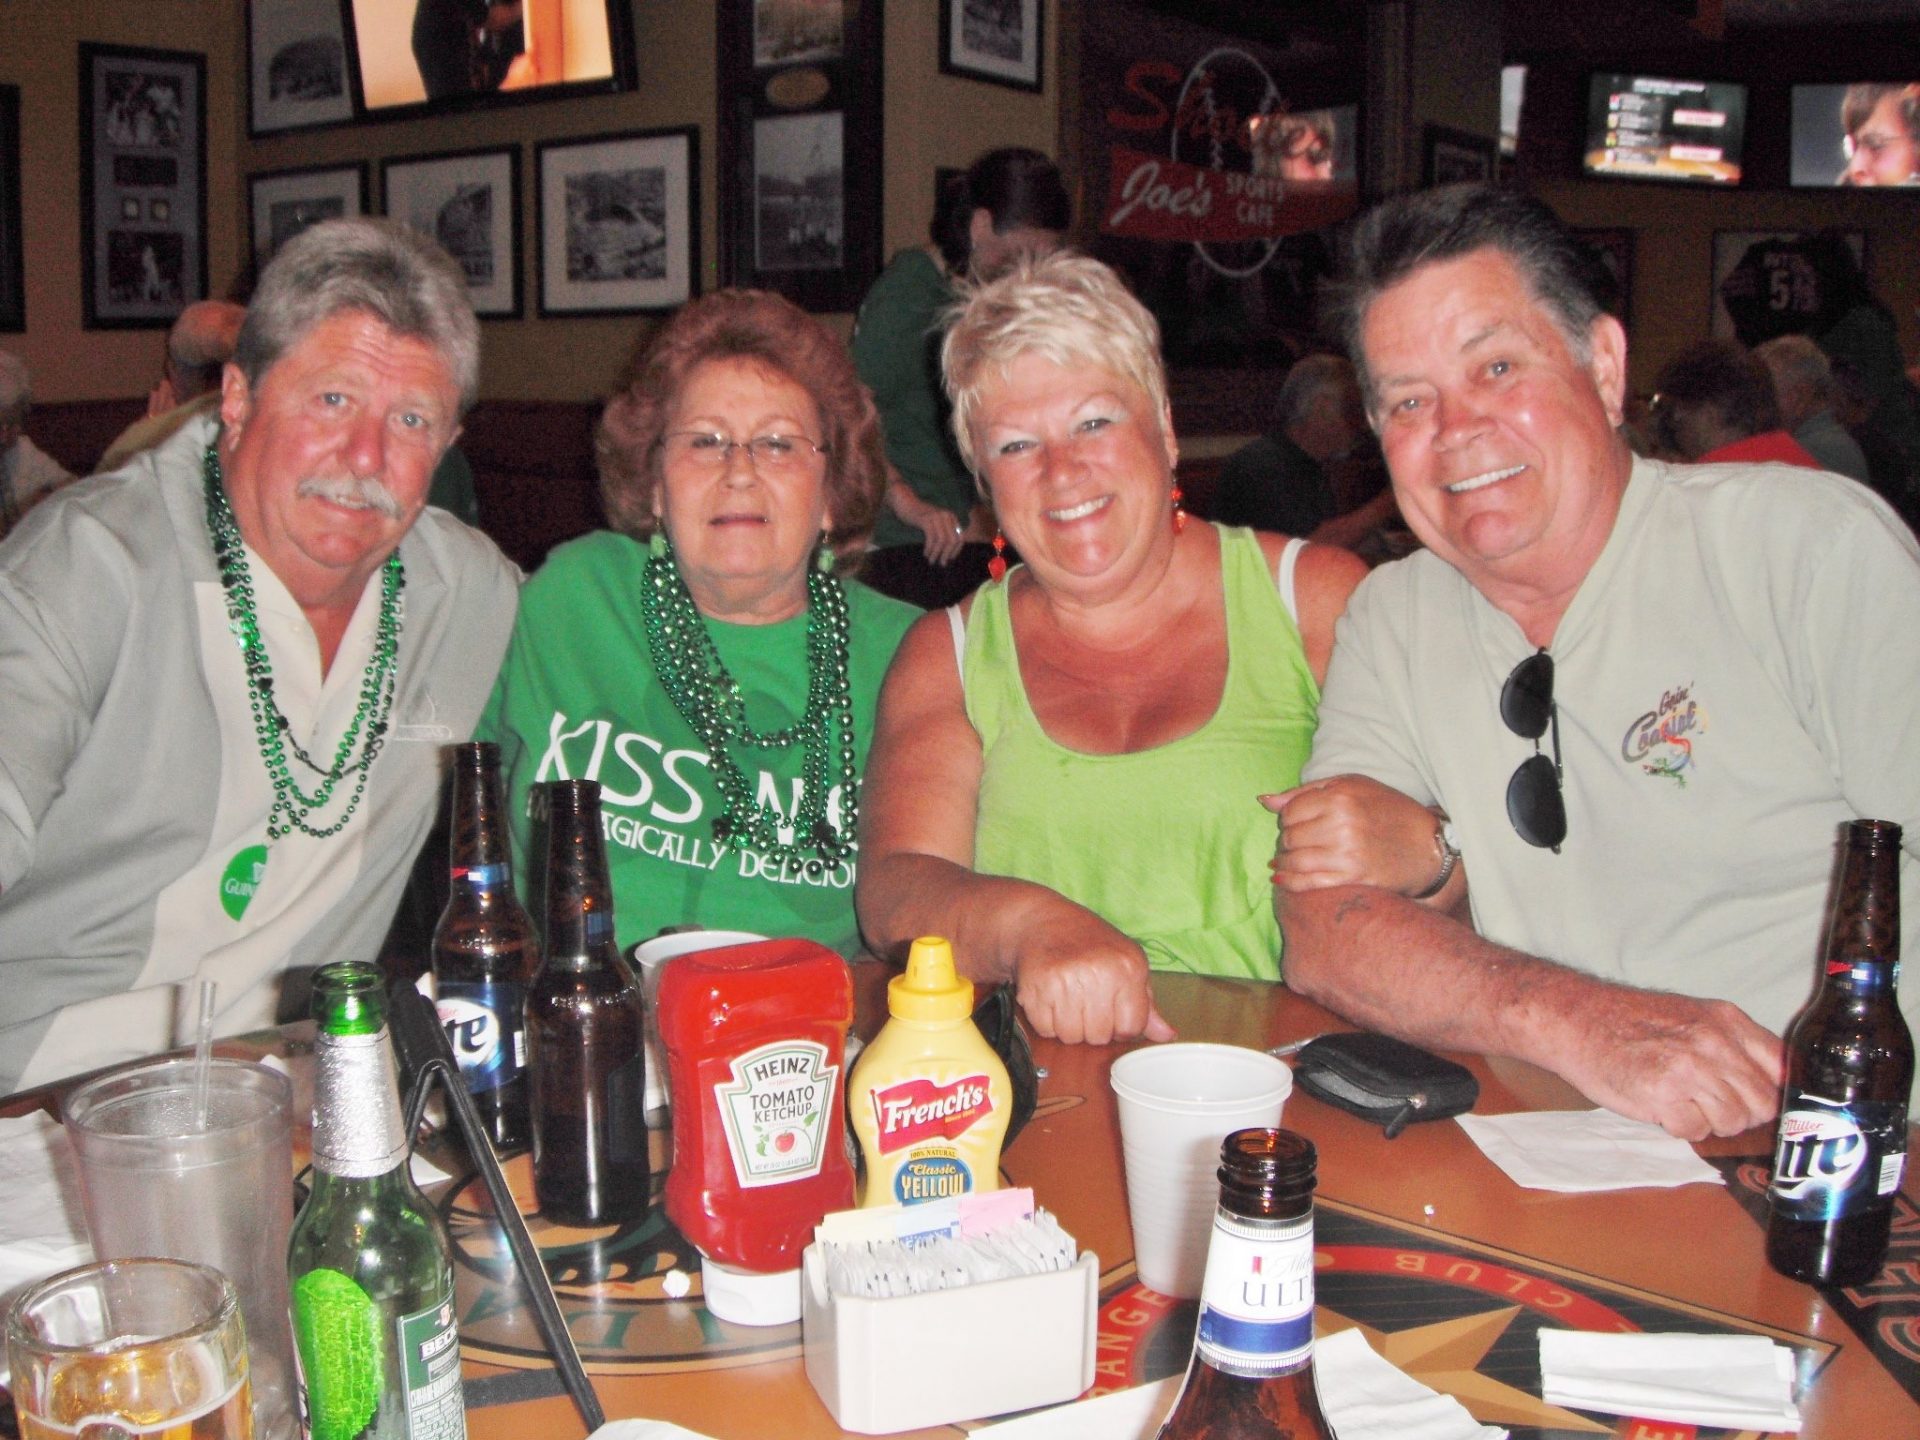 Sandy & Don and Hoagy & I celebrating  St. Patty’s Day  in Florida 